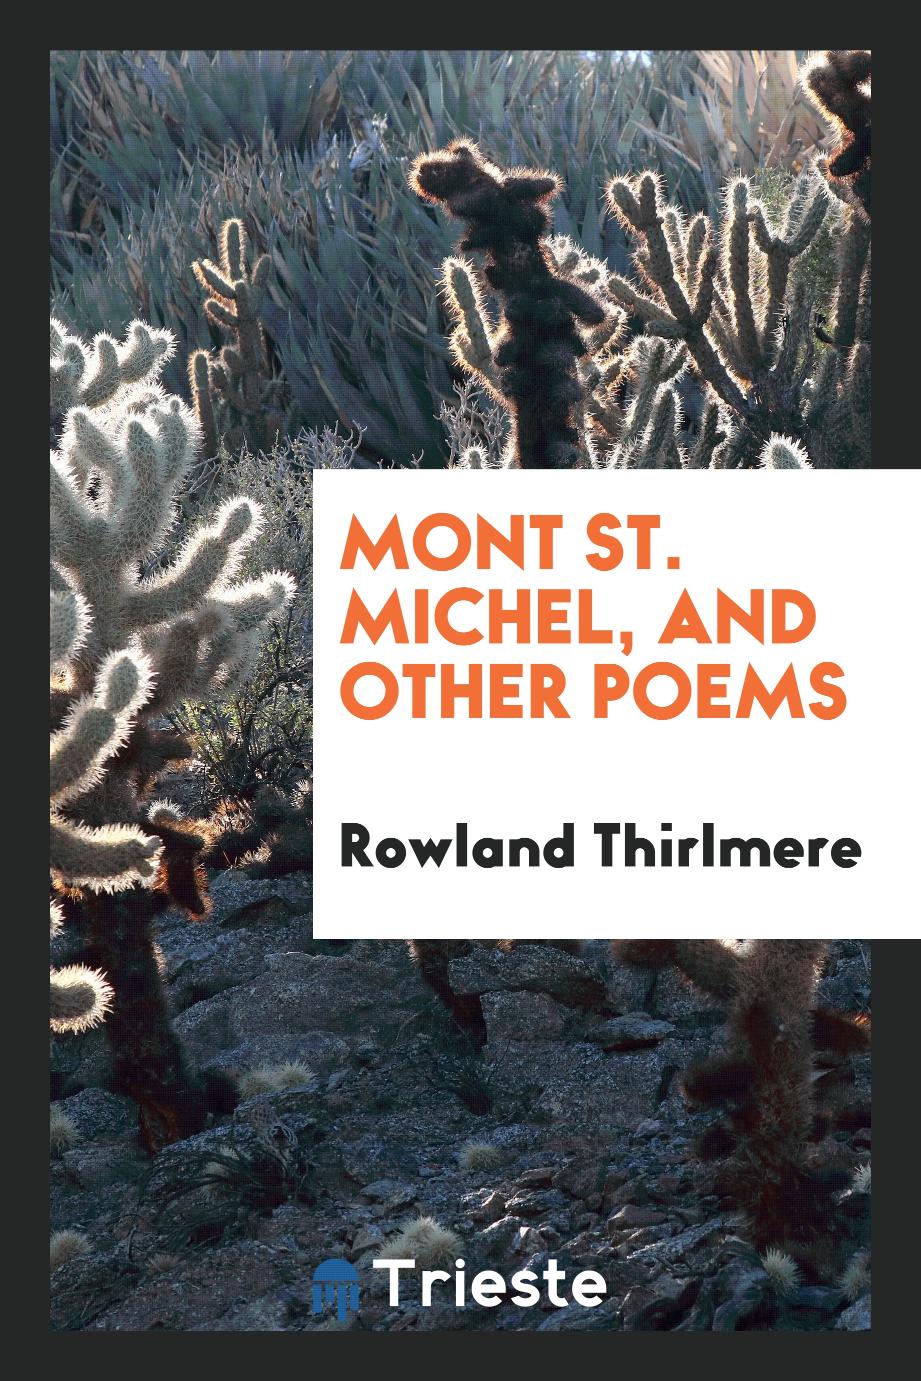 Mont St. Michel, and other poems